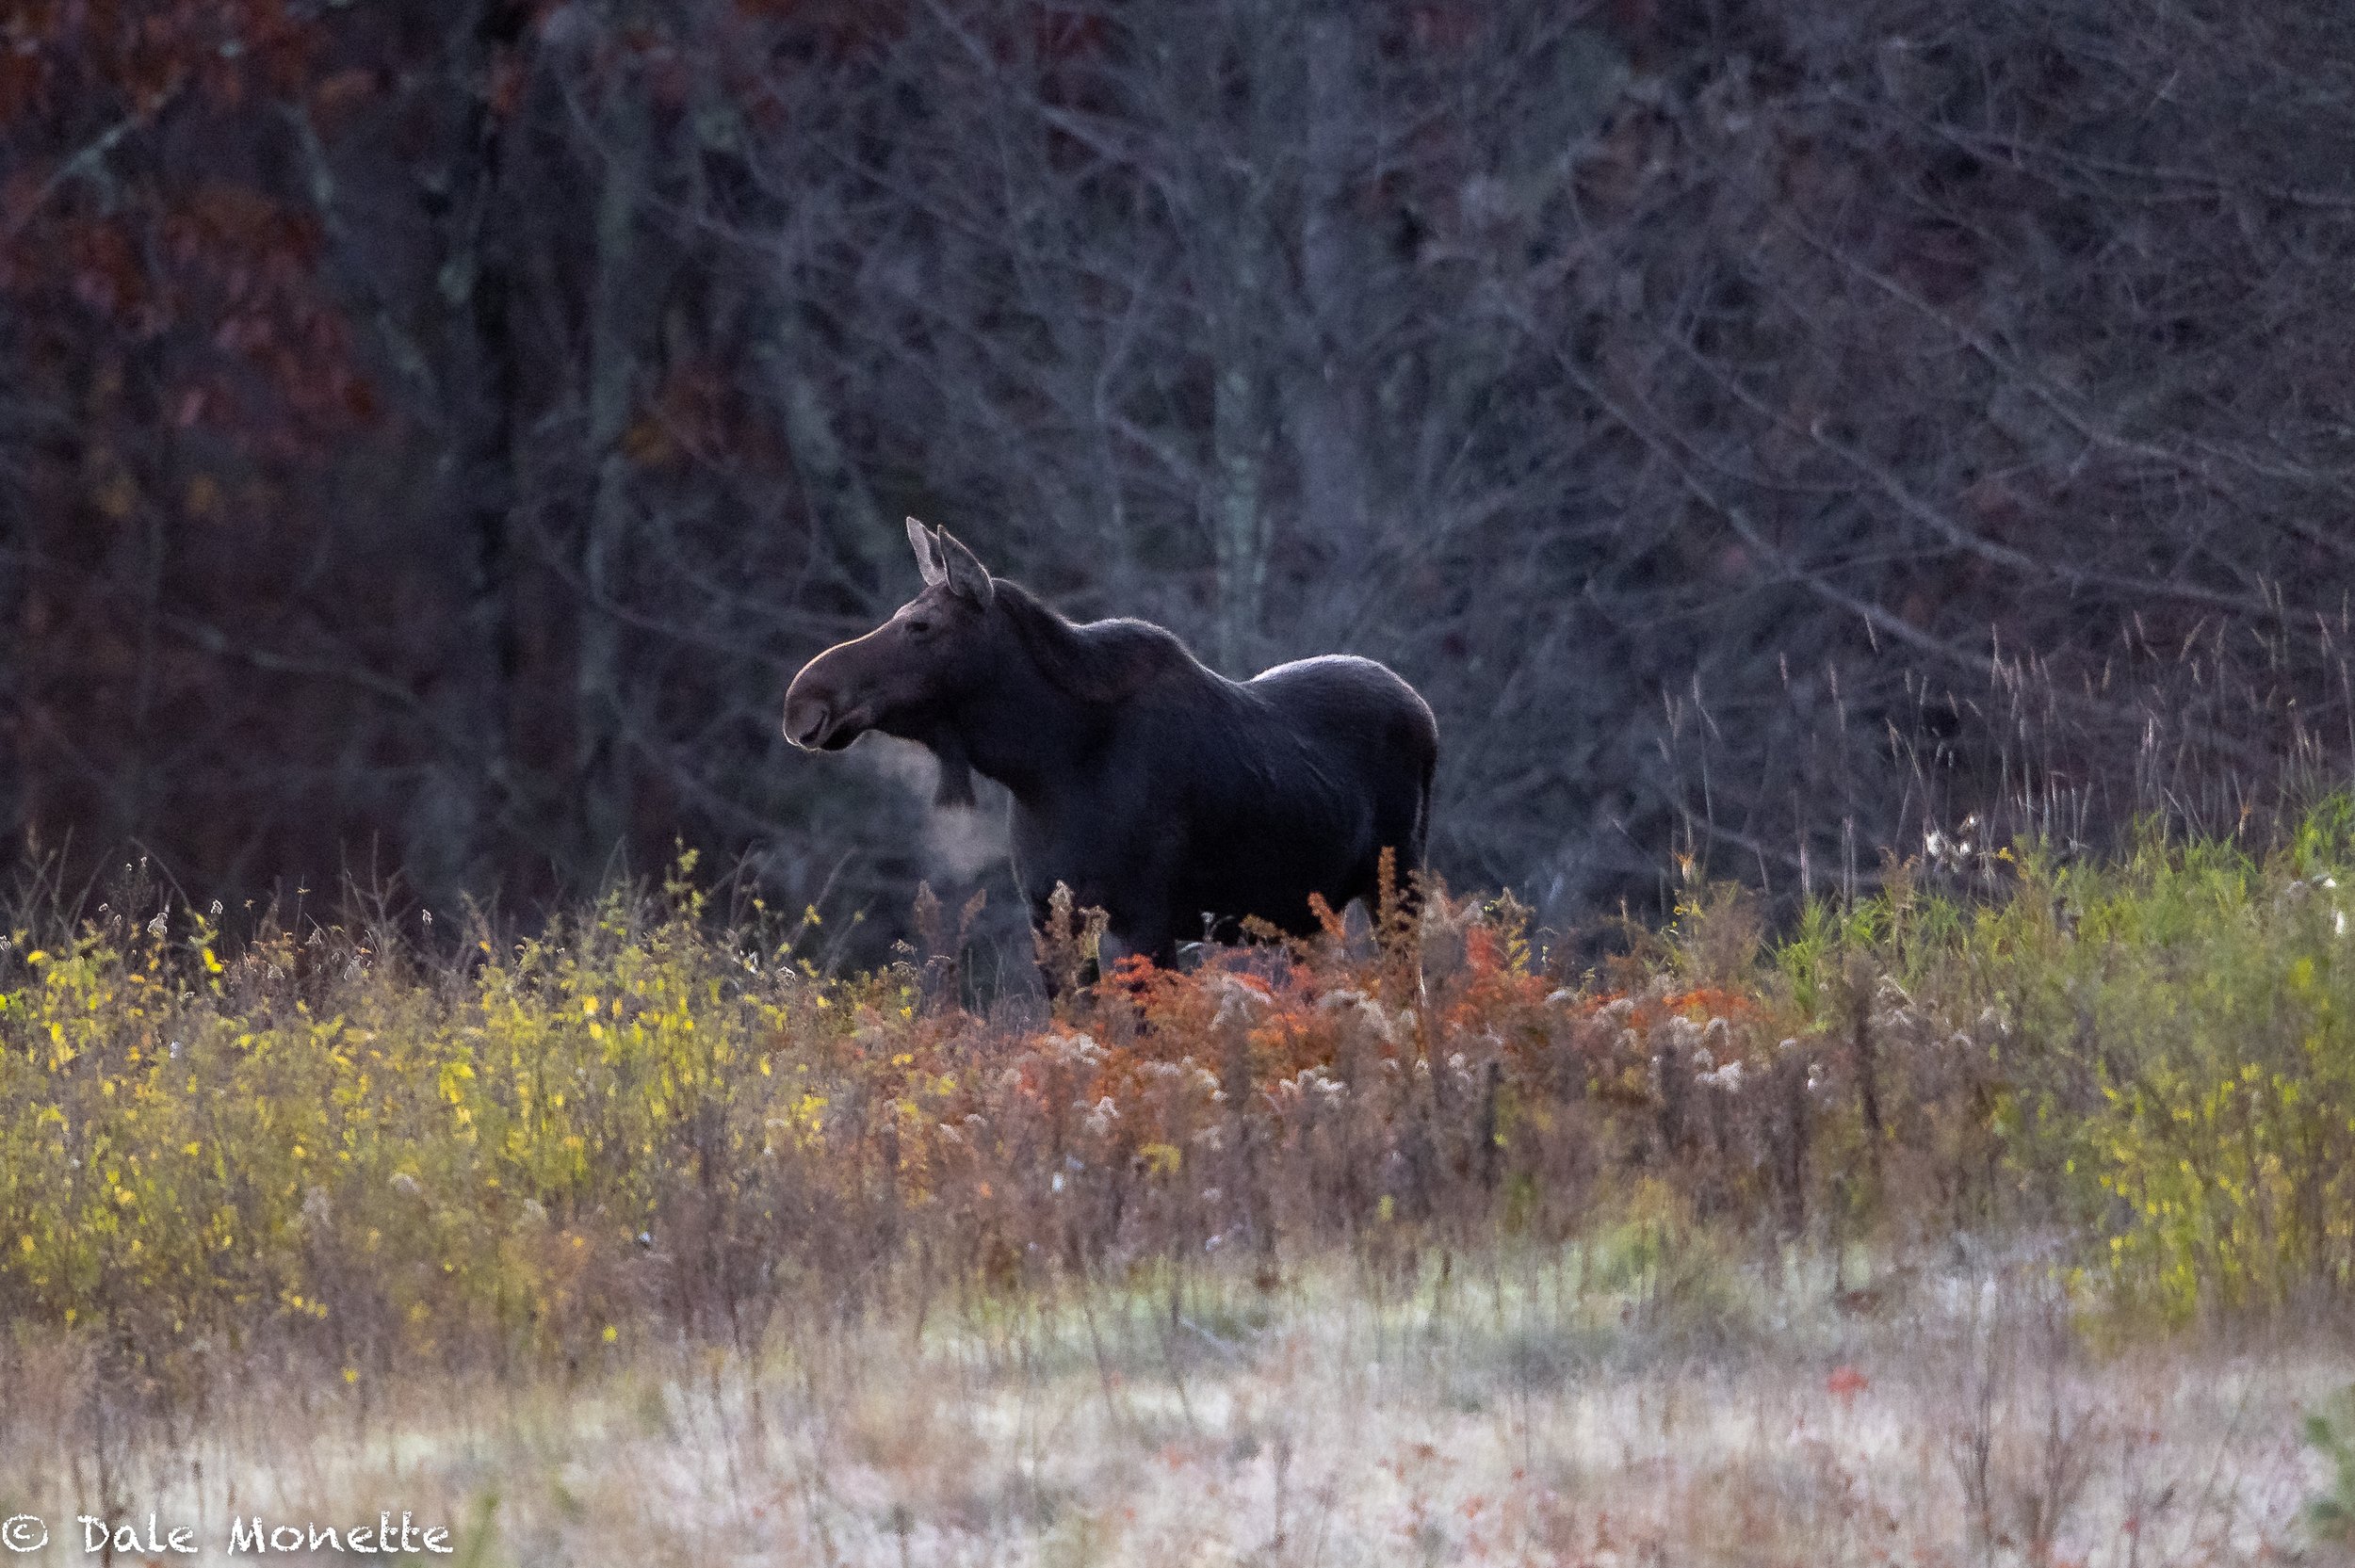   Early  morning sun backlighting this healthy female moose and her breath at 30 degrees F.  